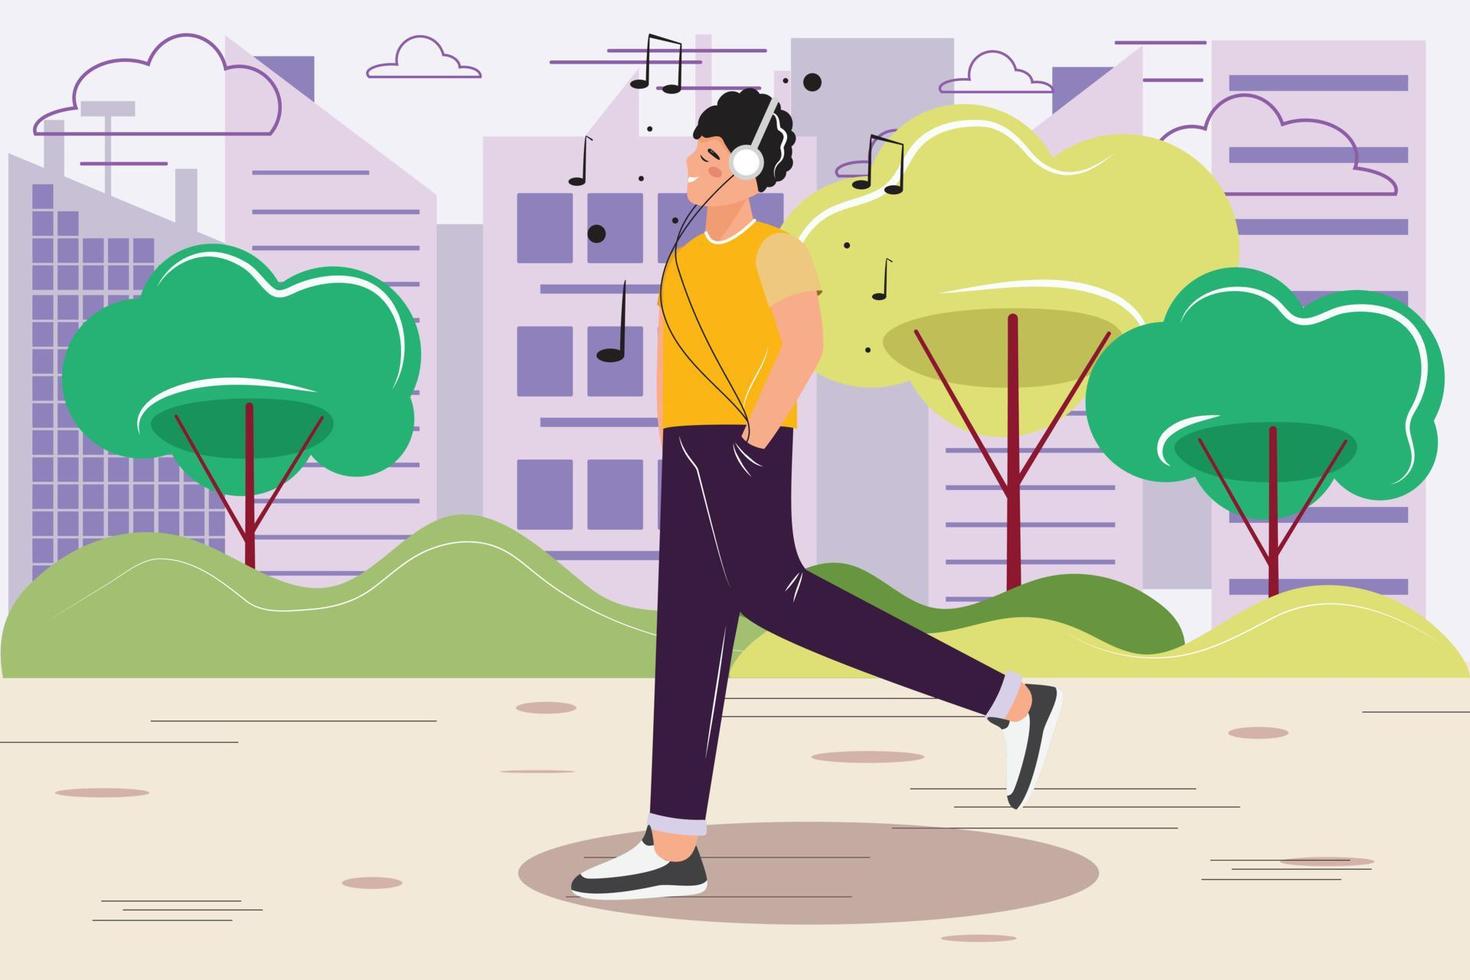 Happy young man enjoying music, podcast, radio. Man wearing headphones and walking in the city park. Music, podcast, radio concept illustration. Vector flat design illustration.